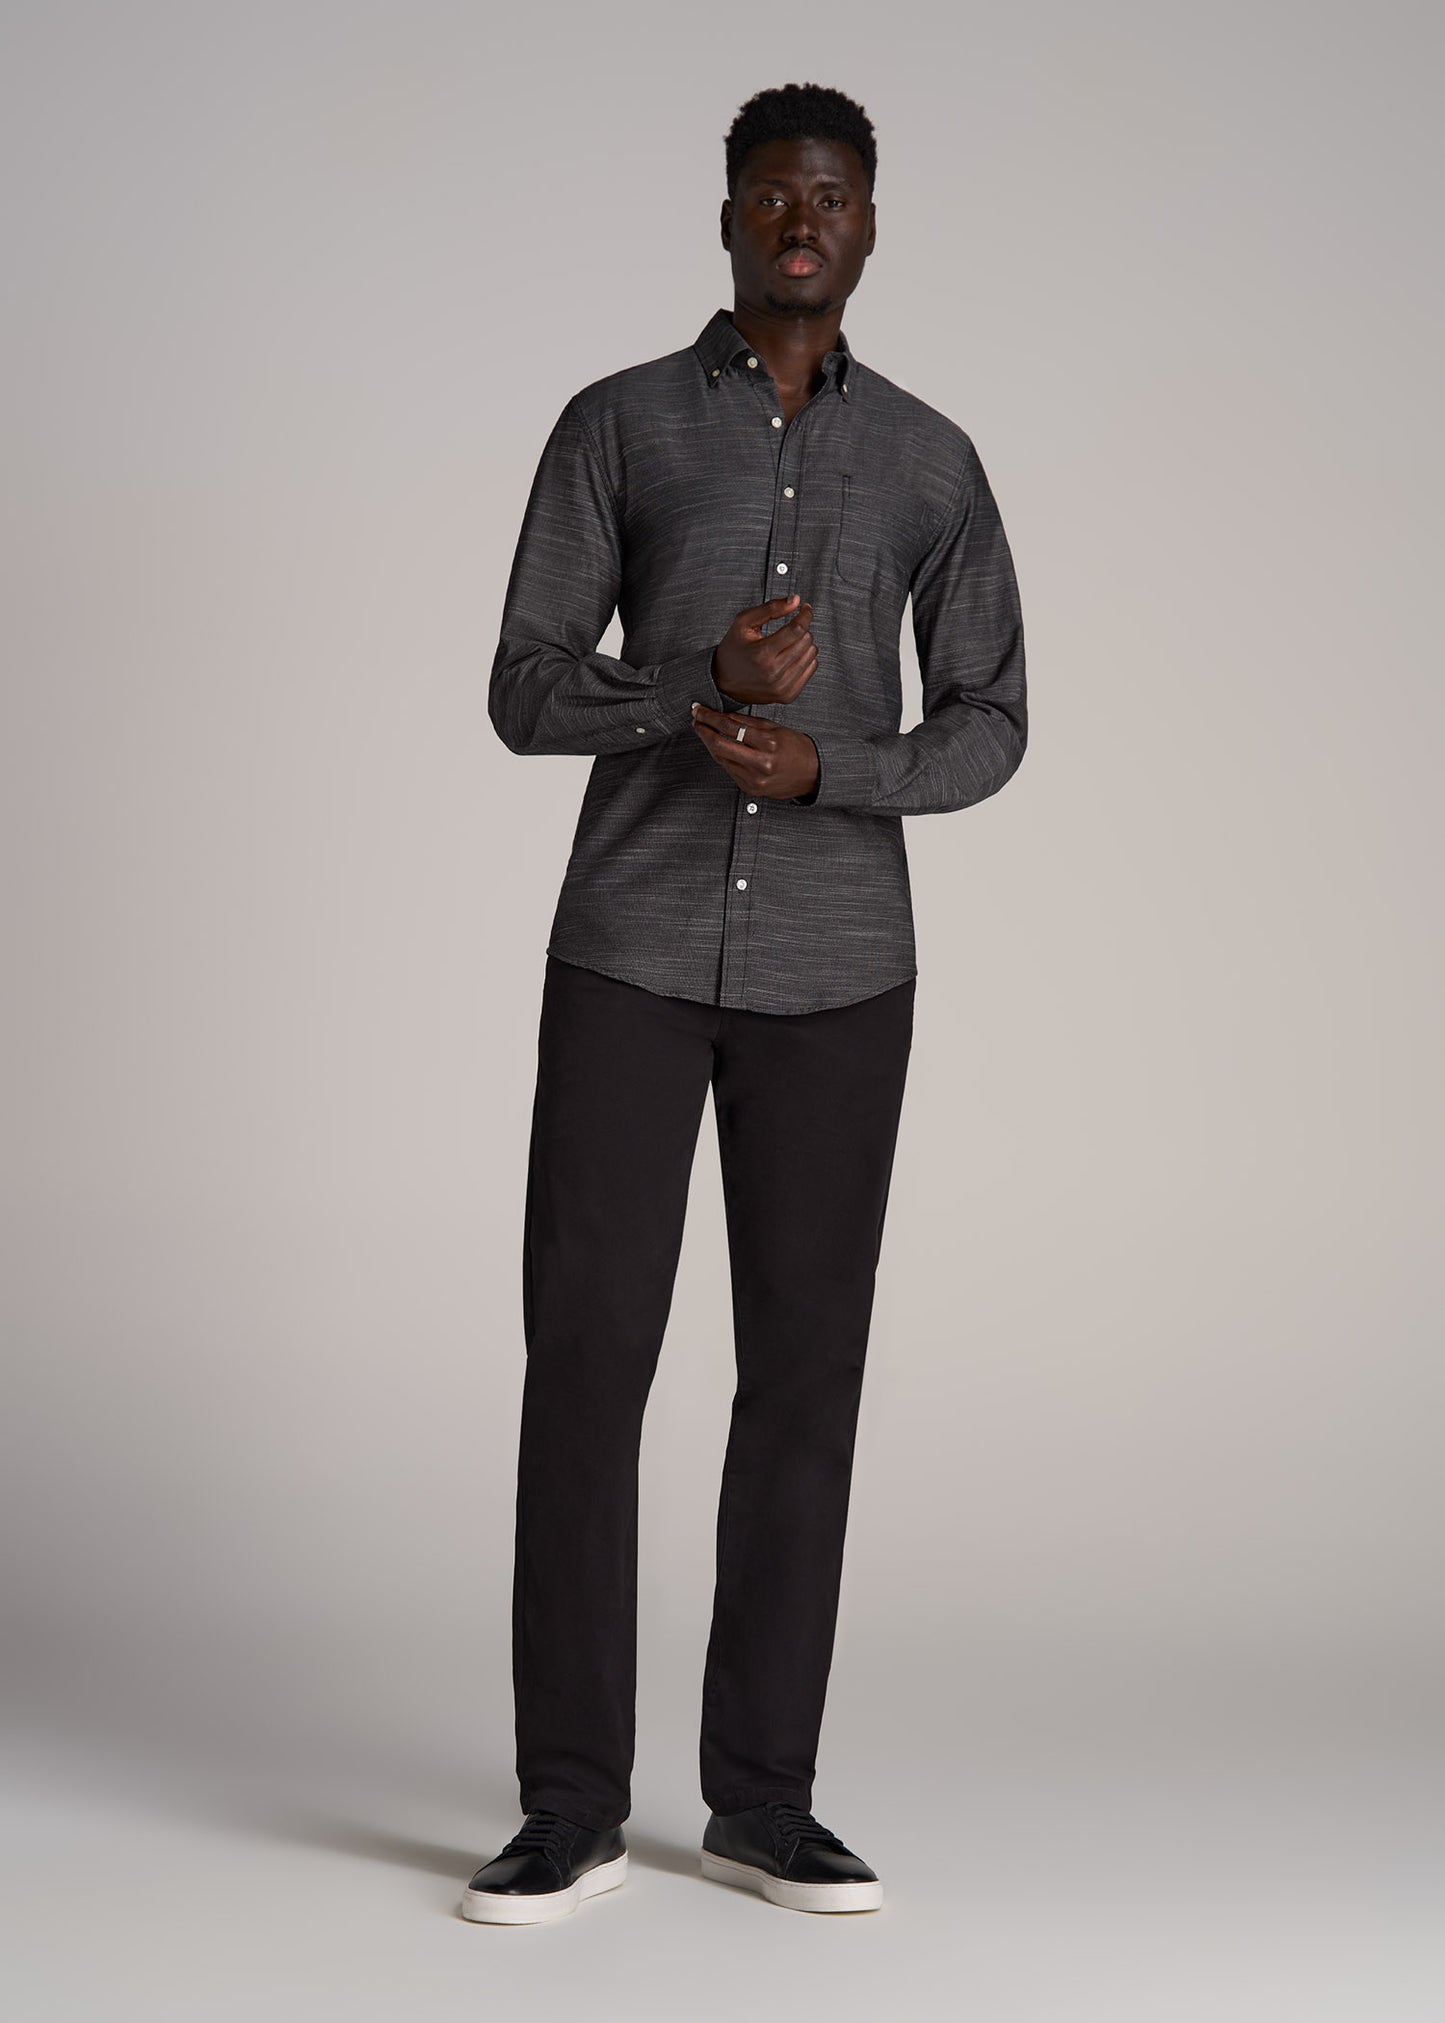 Textured Weave Cotton Button-Up Shirt for Tall Men in Black